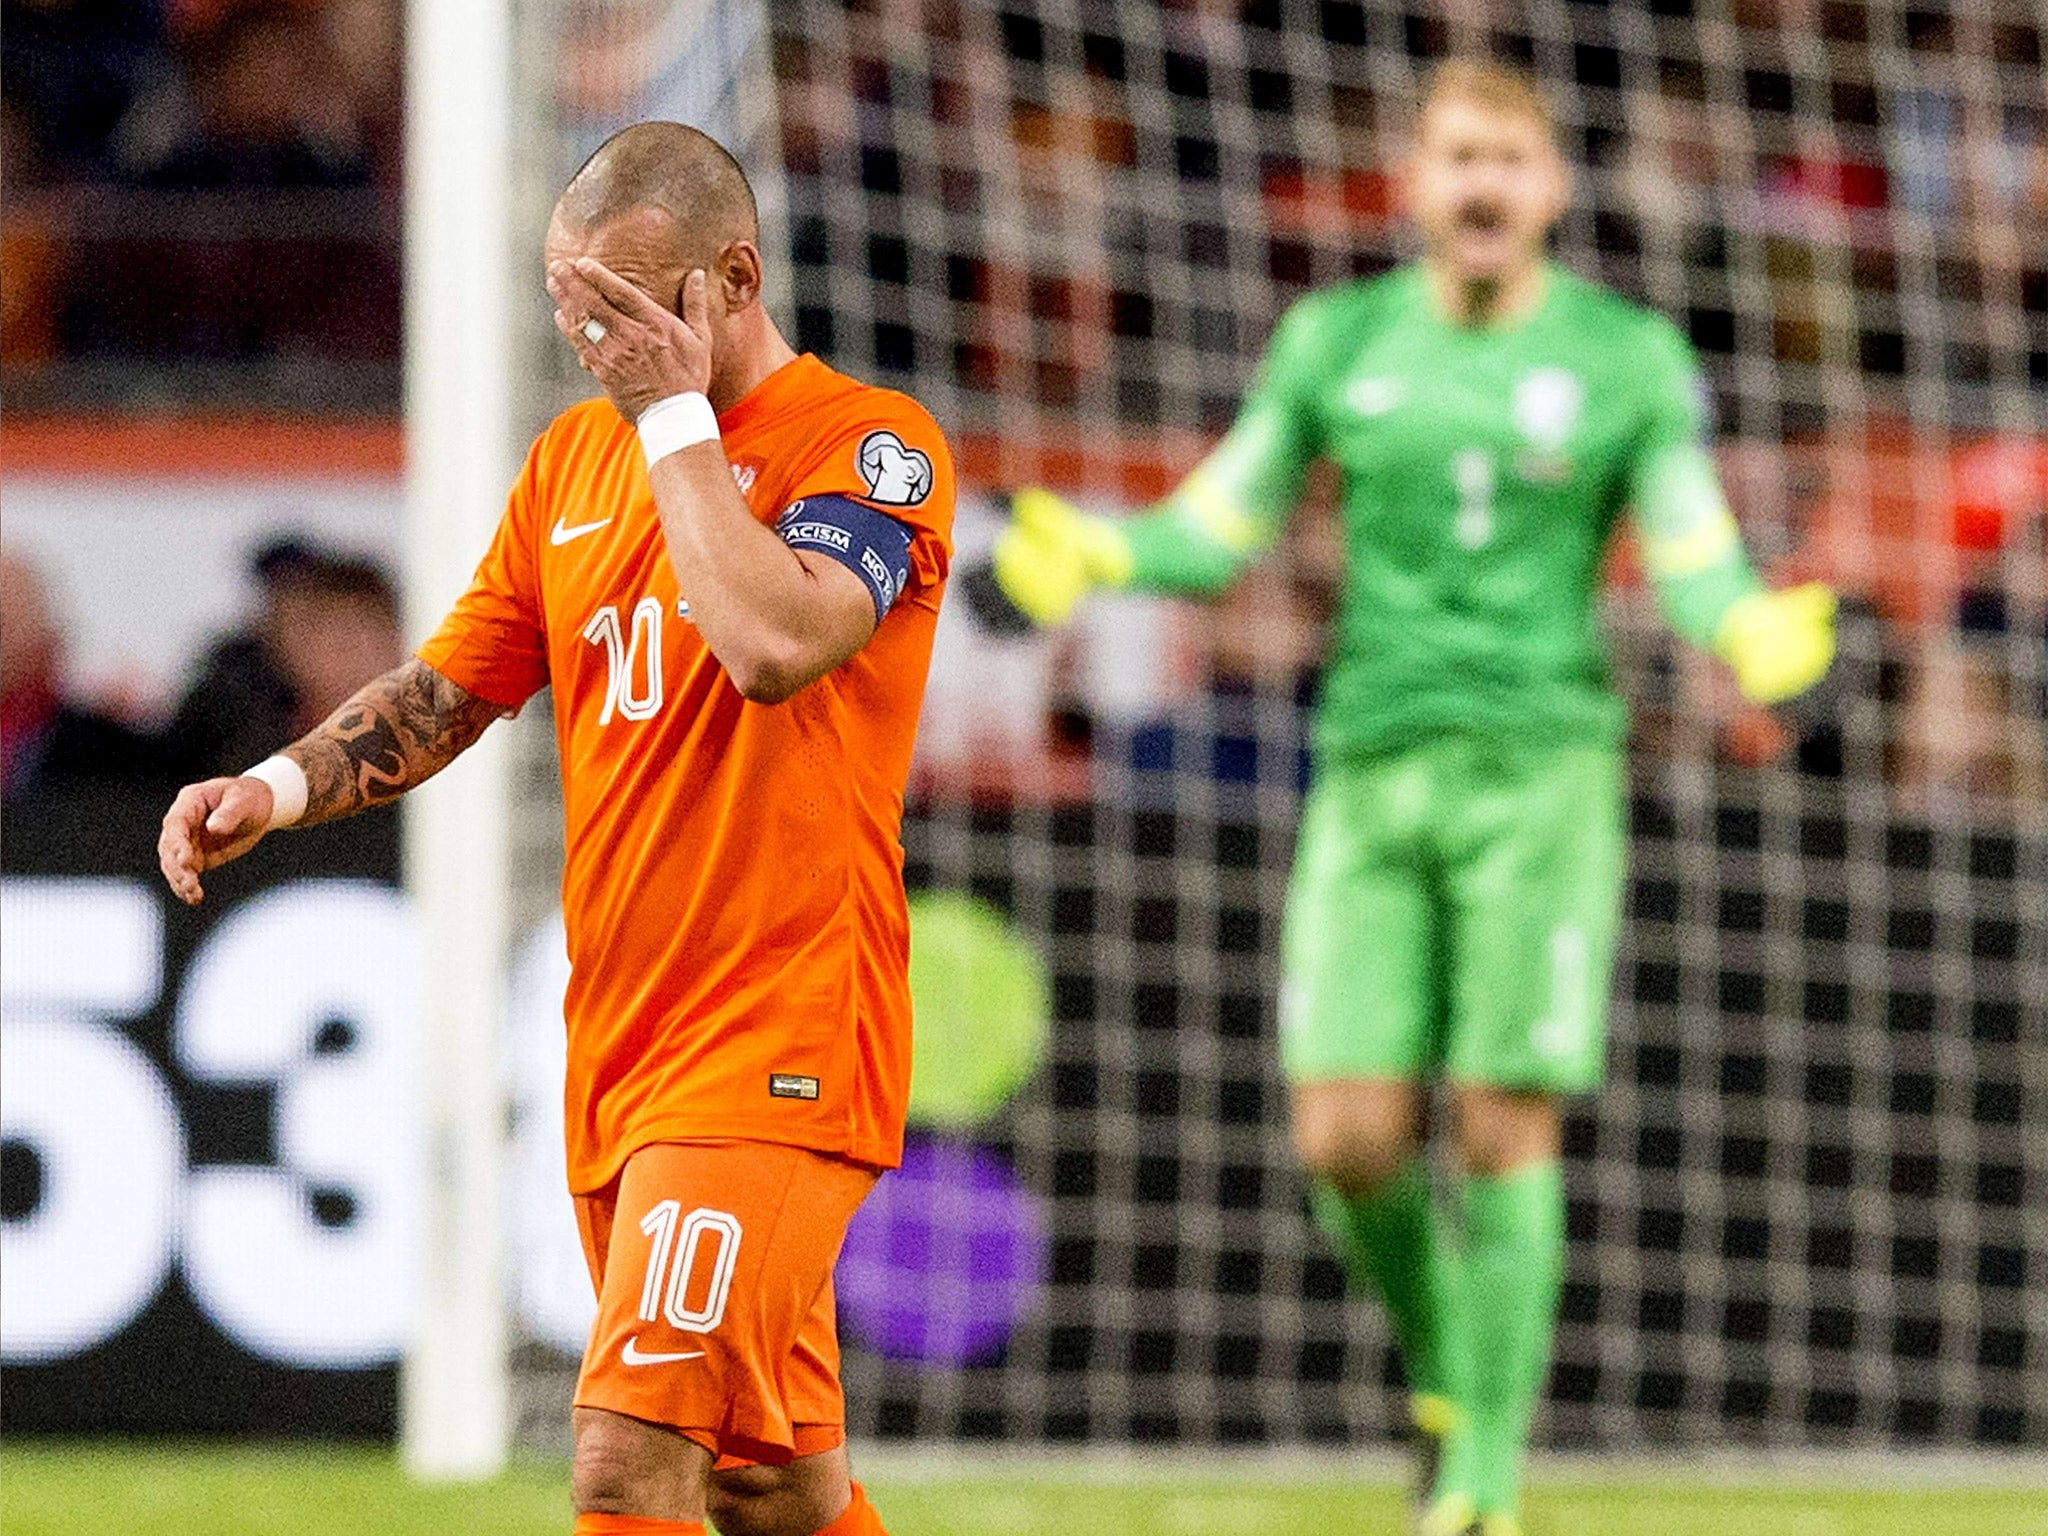 Wesley Sneijder, the Netherlands captain, reacts to one of the goals they conceded last night